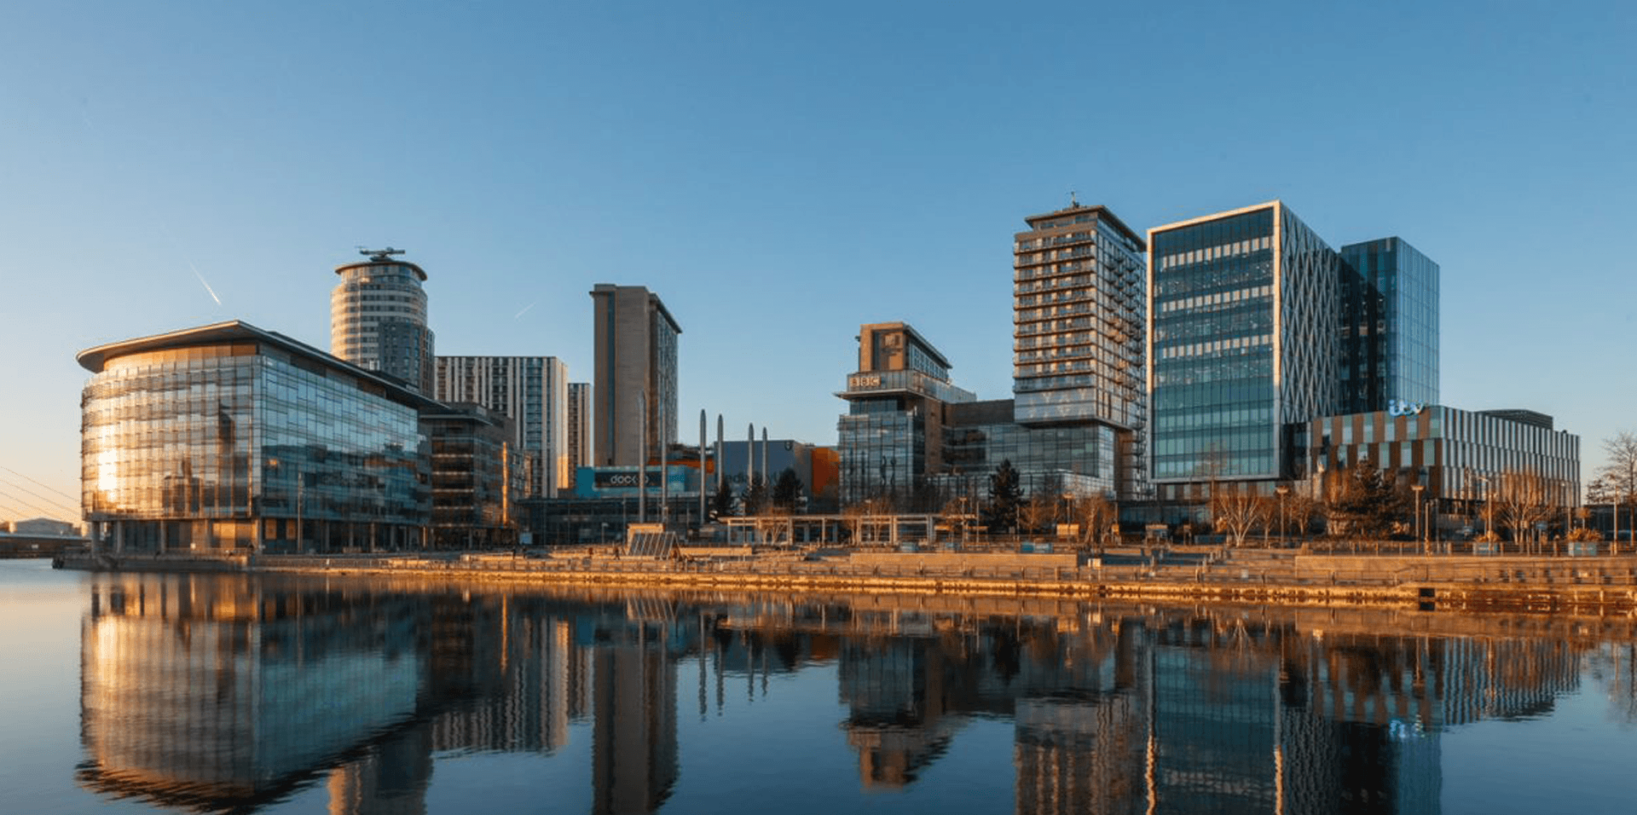 mediacity skyline, picture taken from the Quays river.